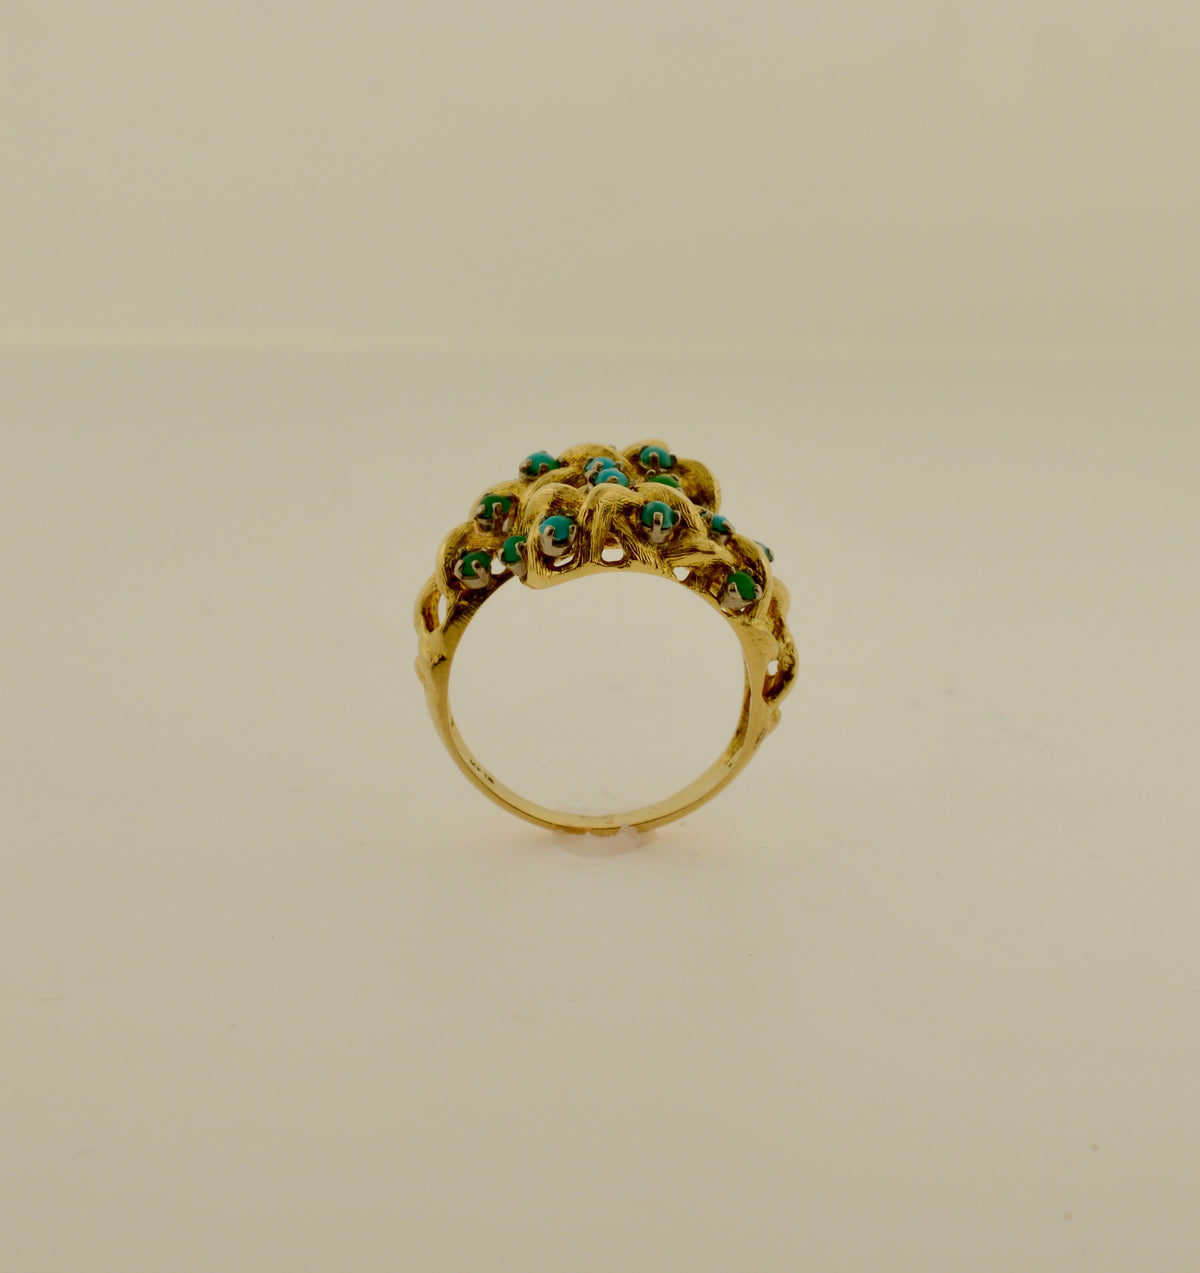 18K Yellow Gold Woven Bypass Ring with 20 Turquoise Stones